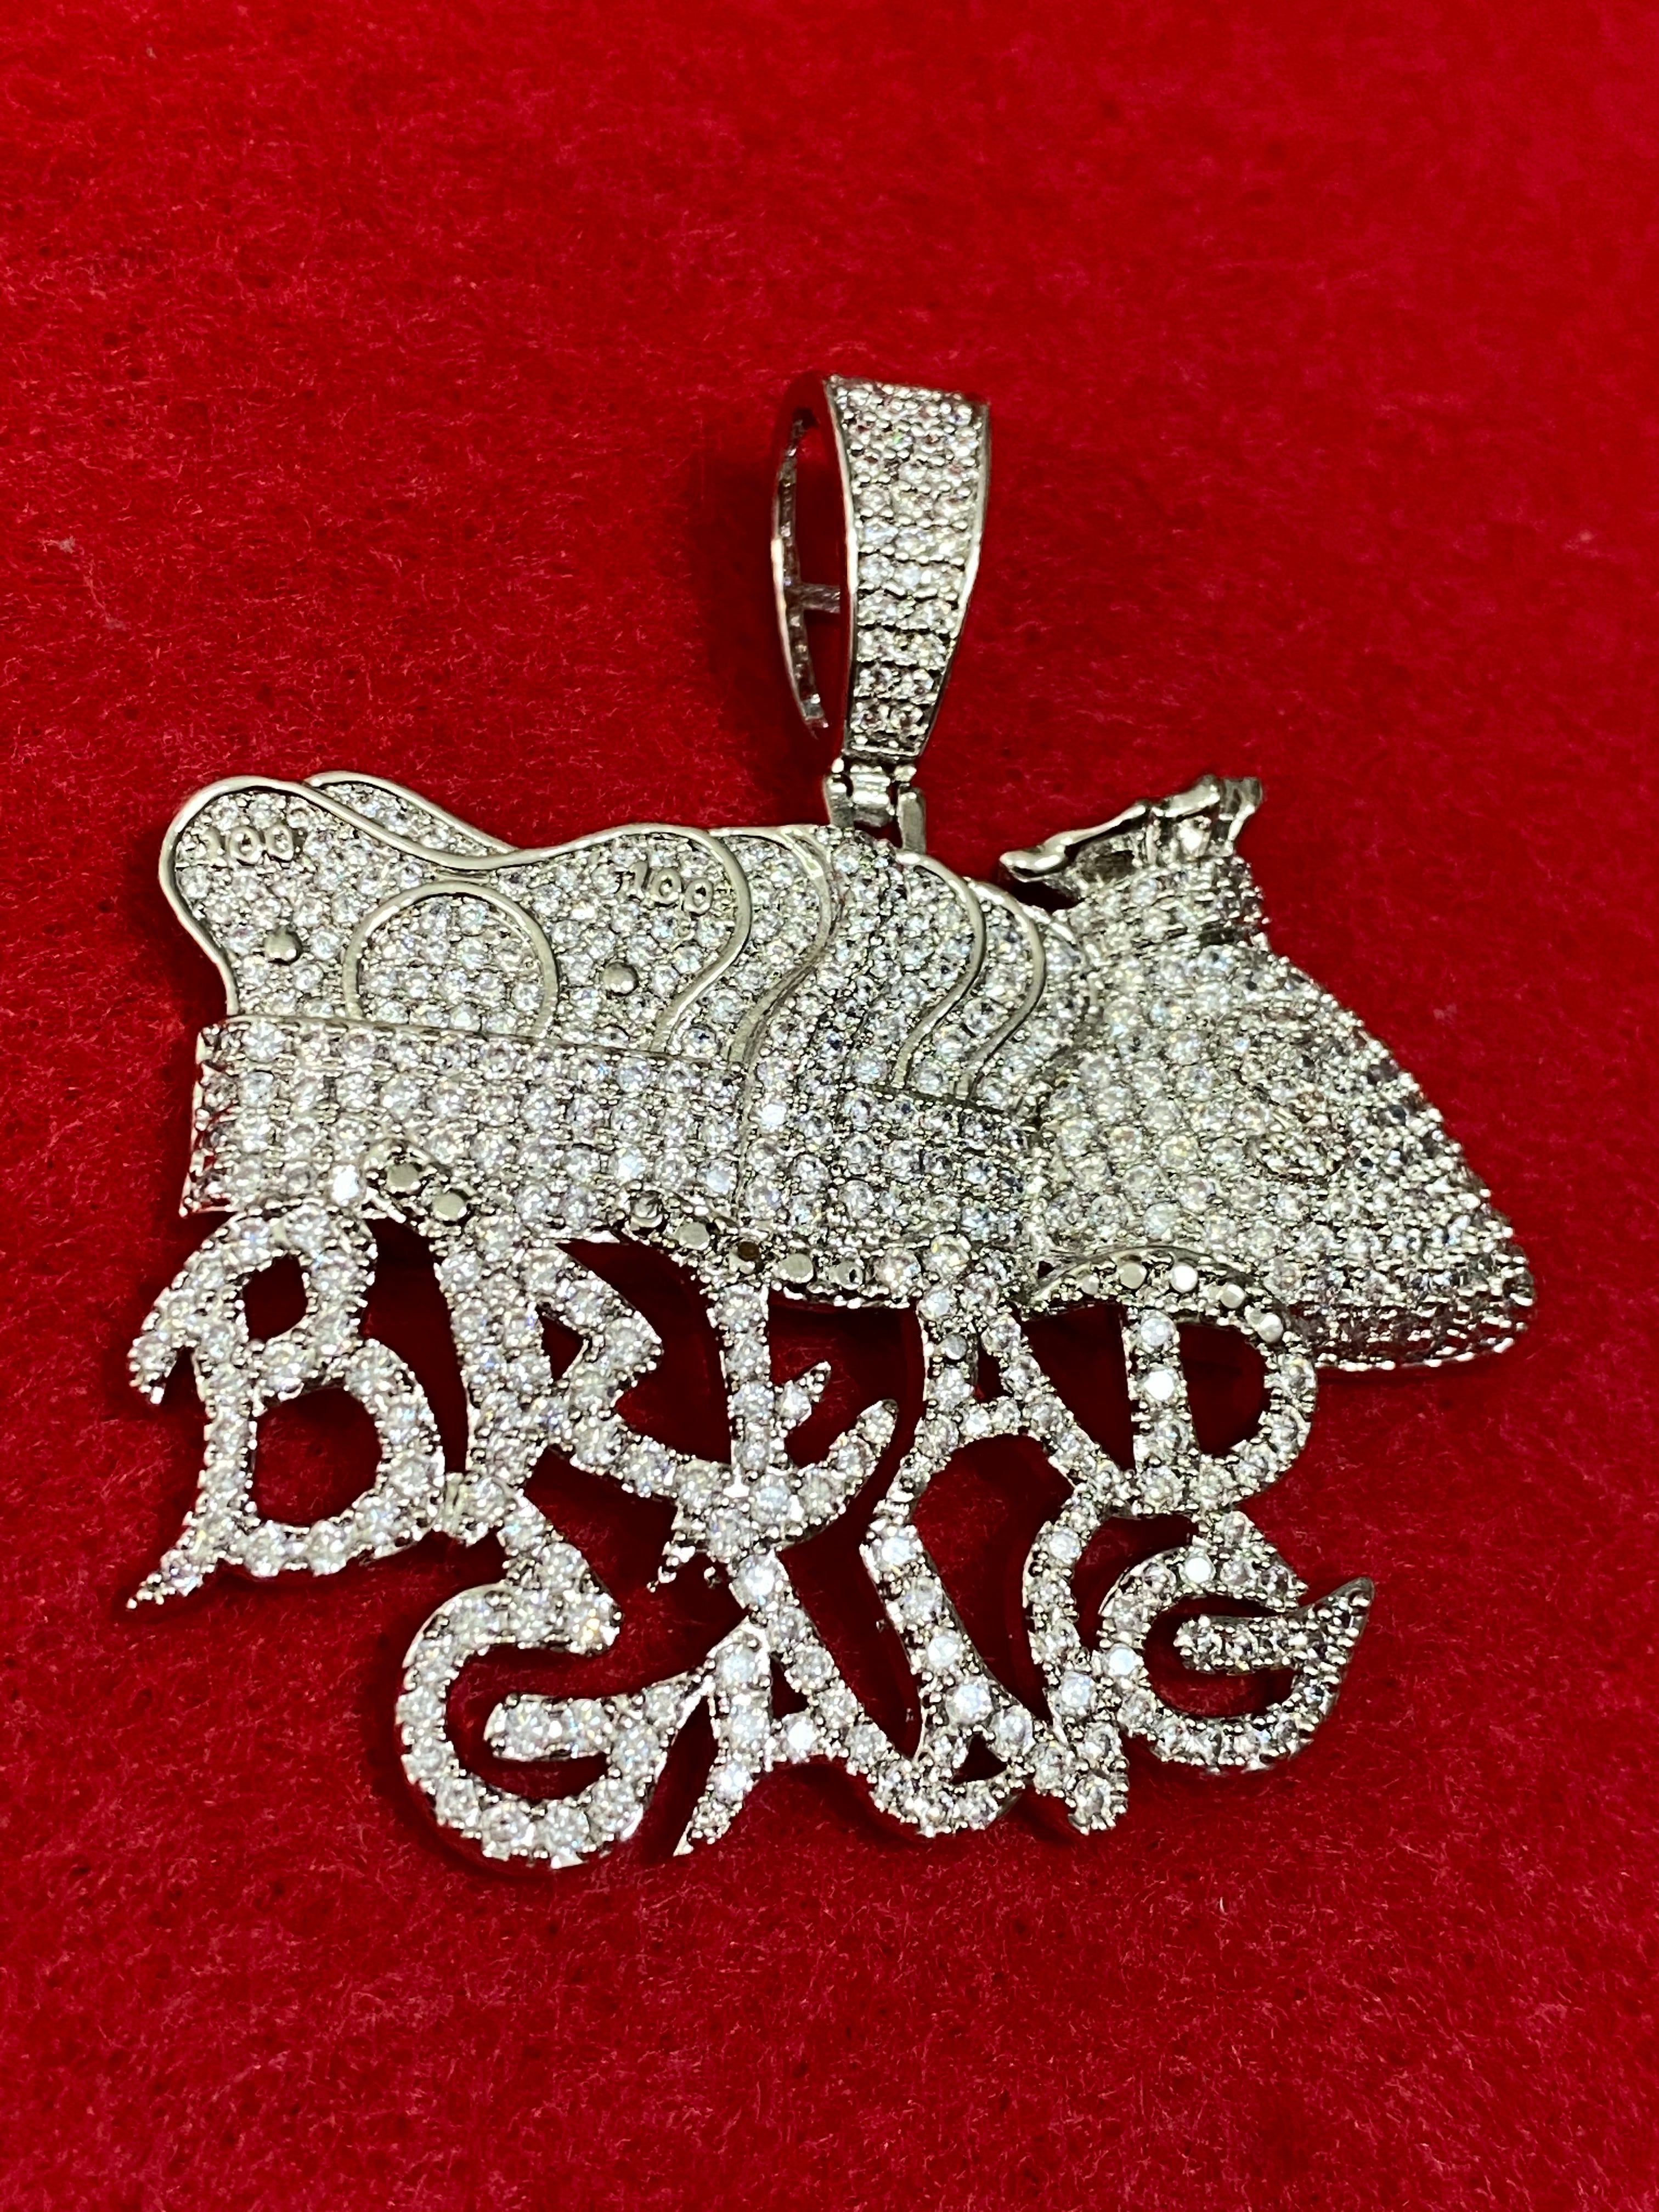 Pendant and chain bread gang